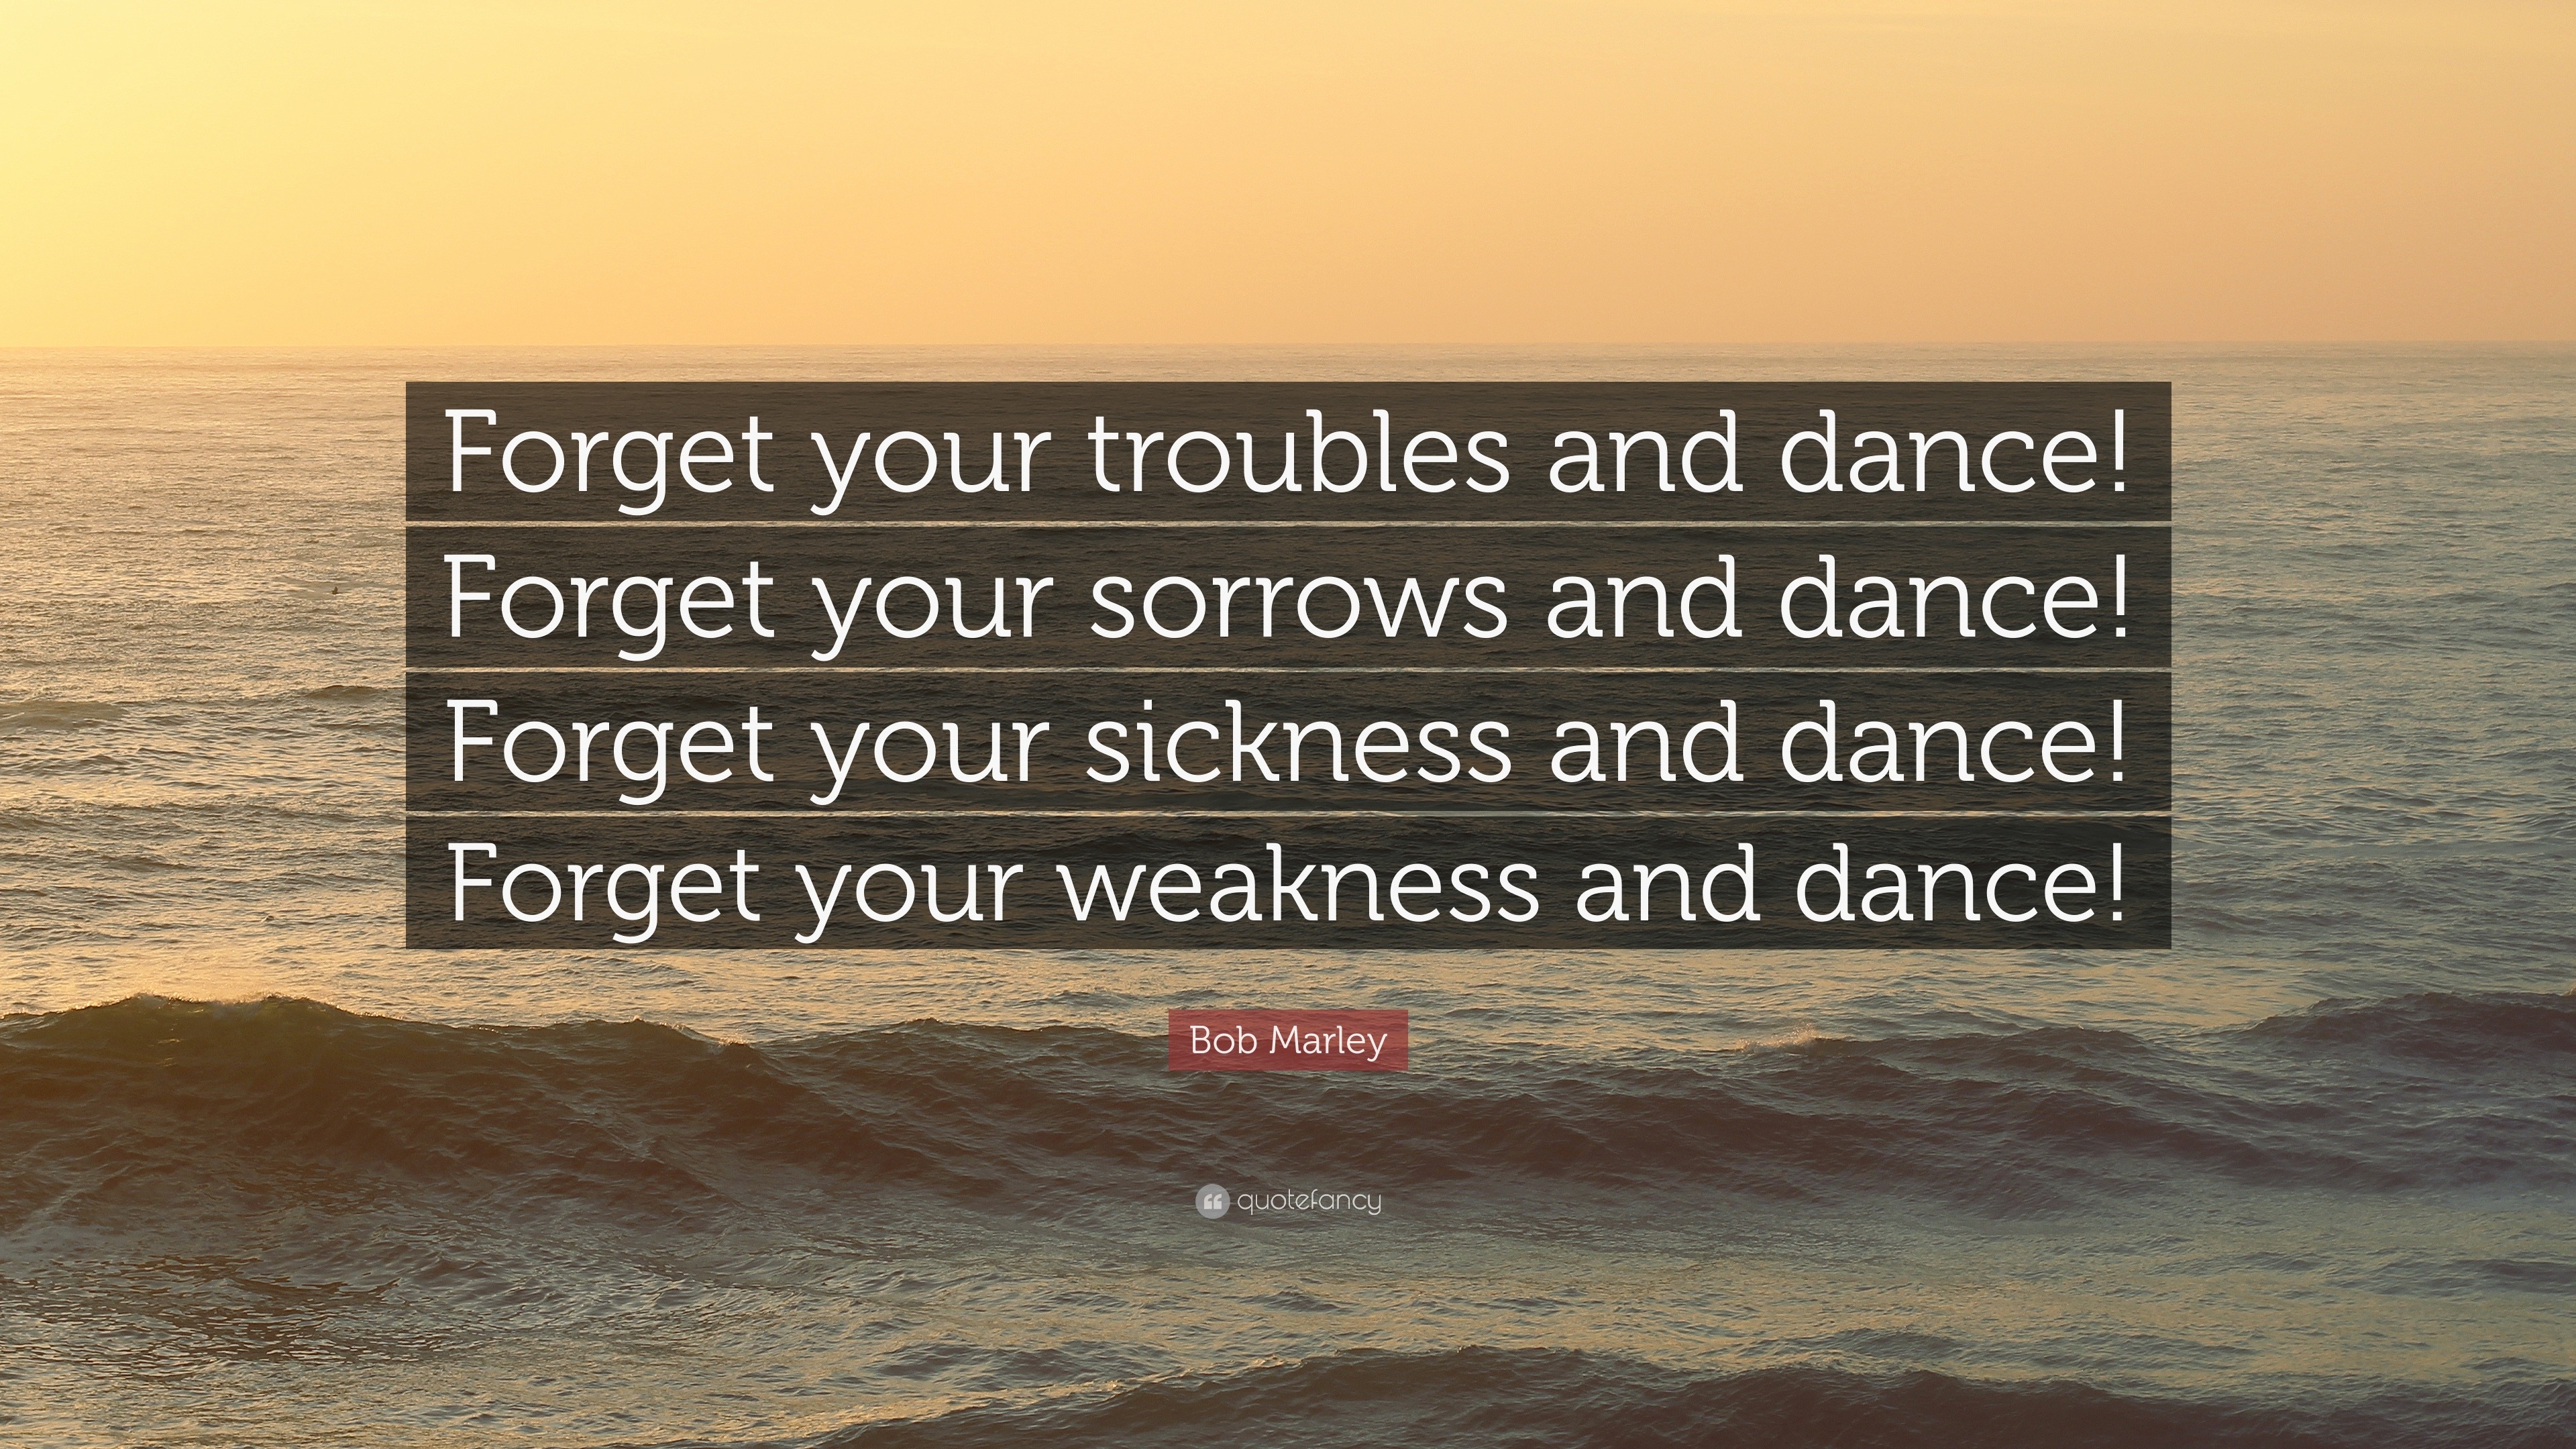 Bob Marley Quote “For your troubles and dance For your sorrows and dance